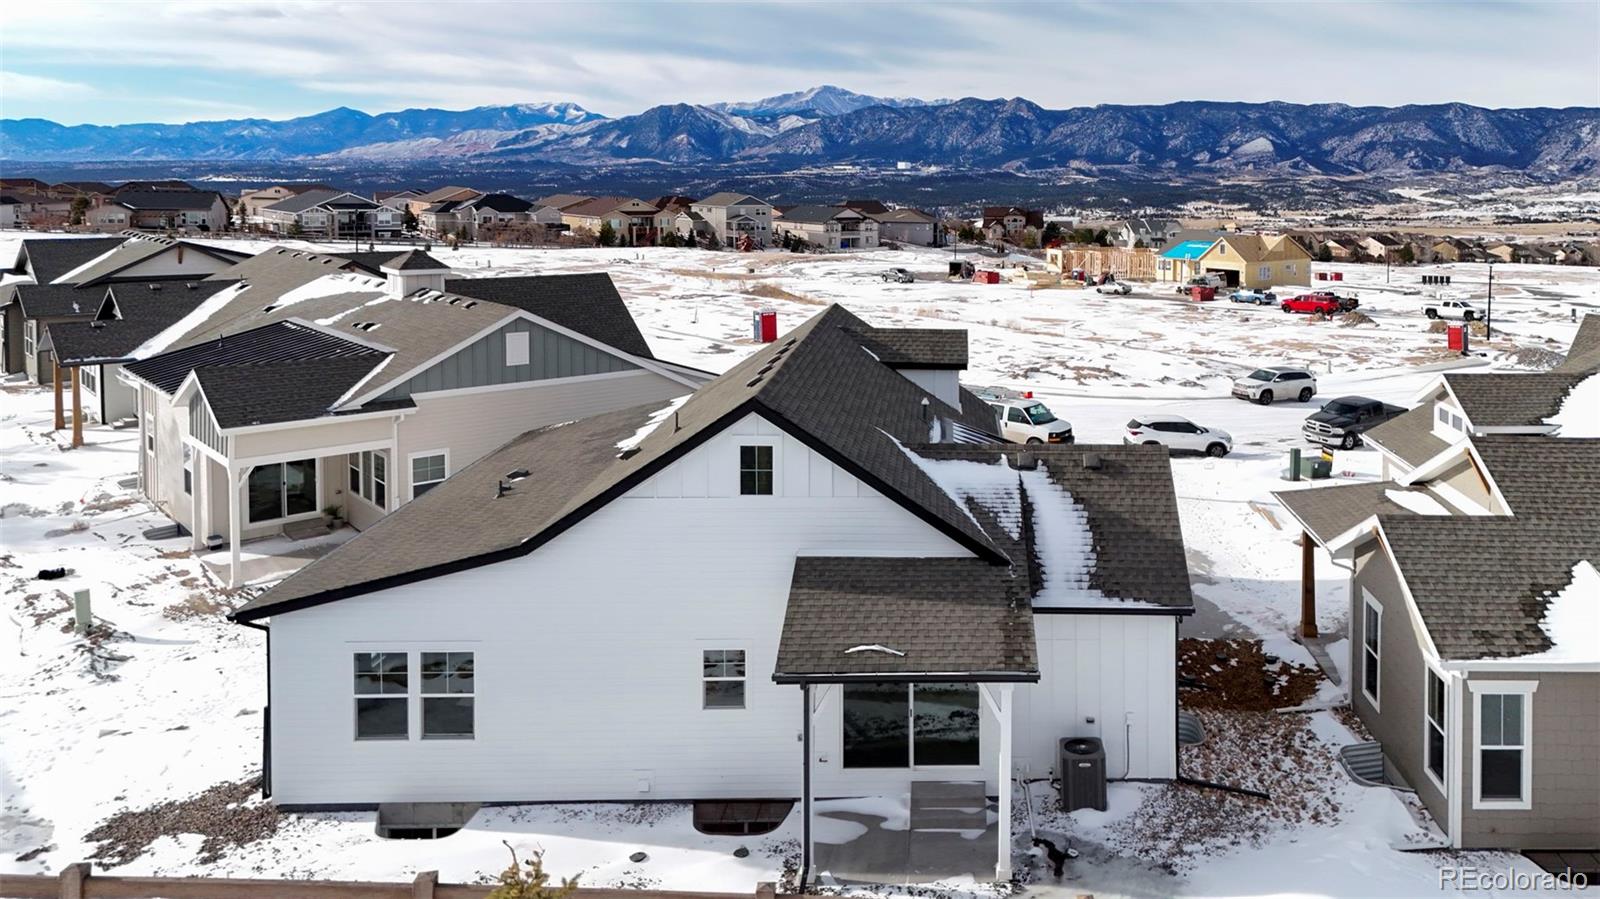 Report Image for 16319  Talons Bluff Lane,Monument, Colorado